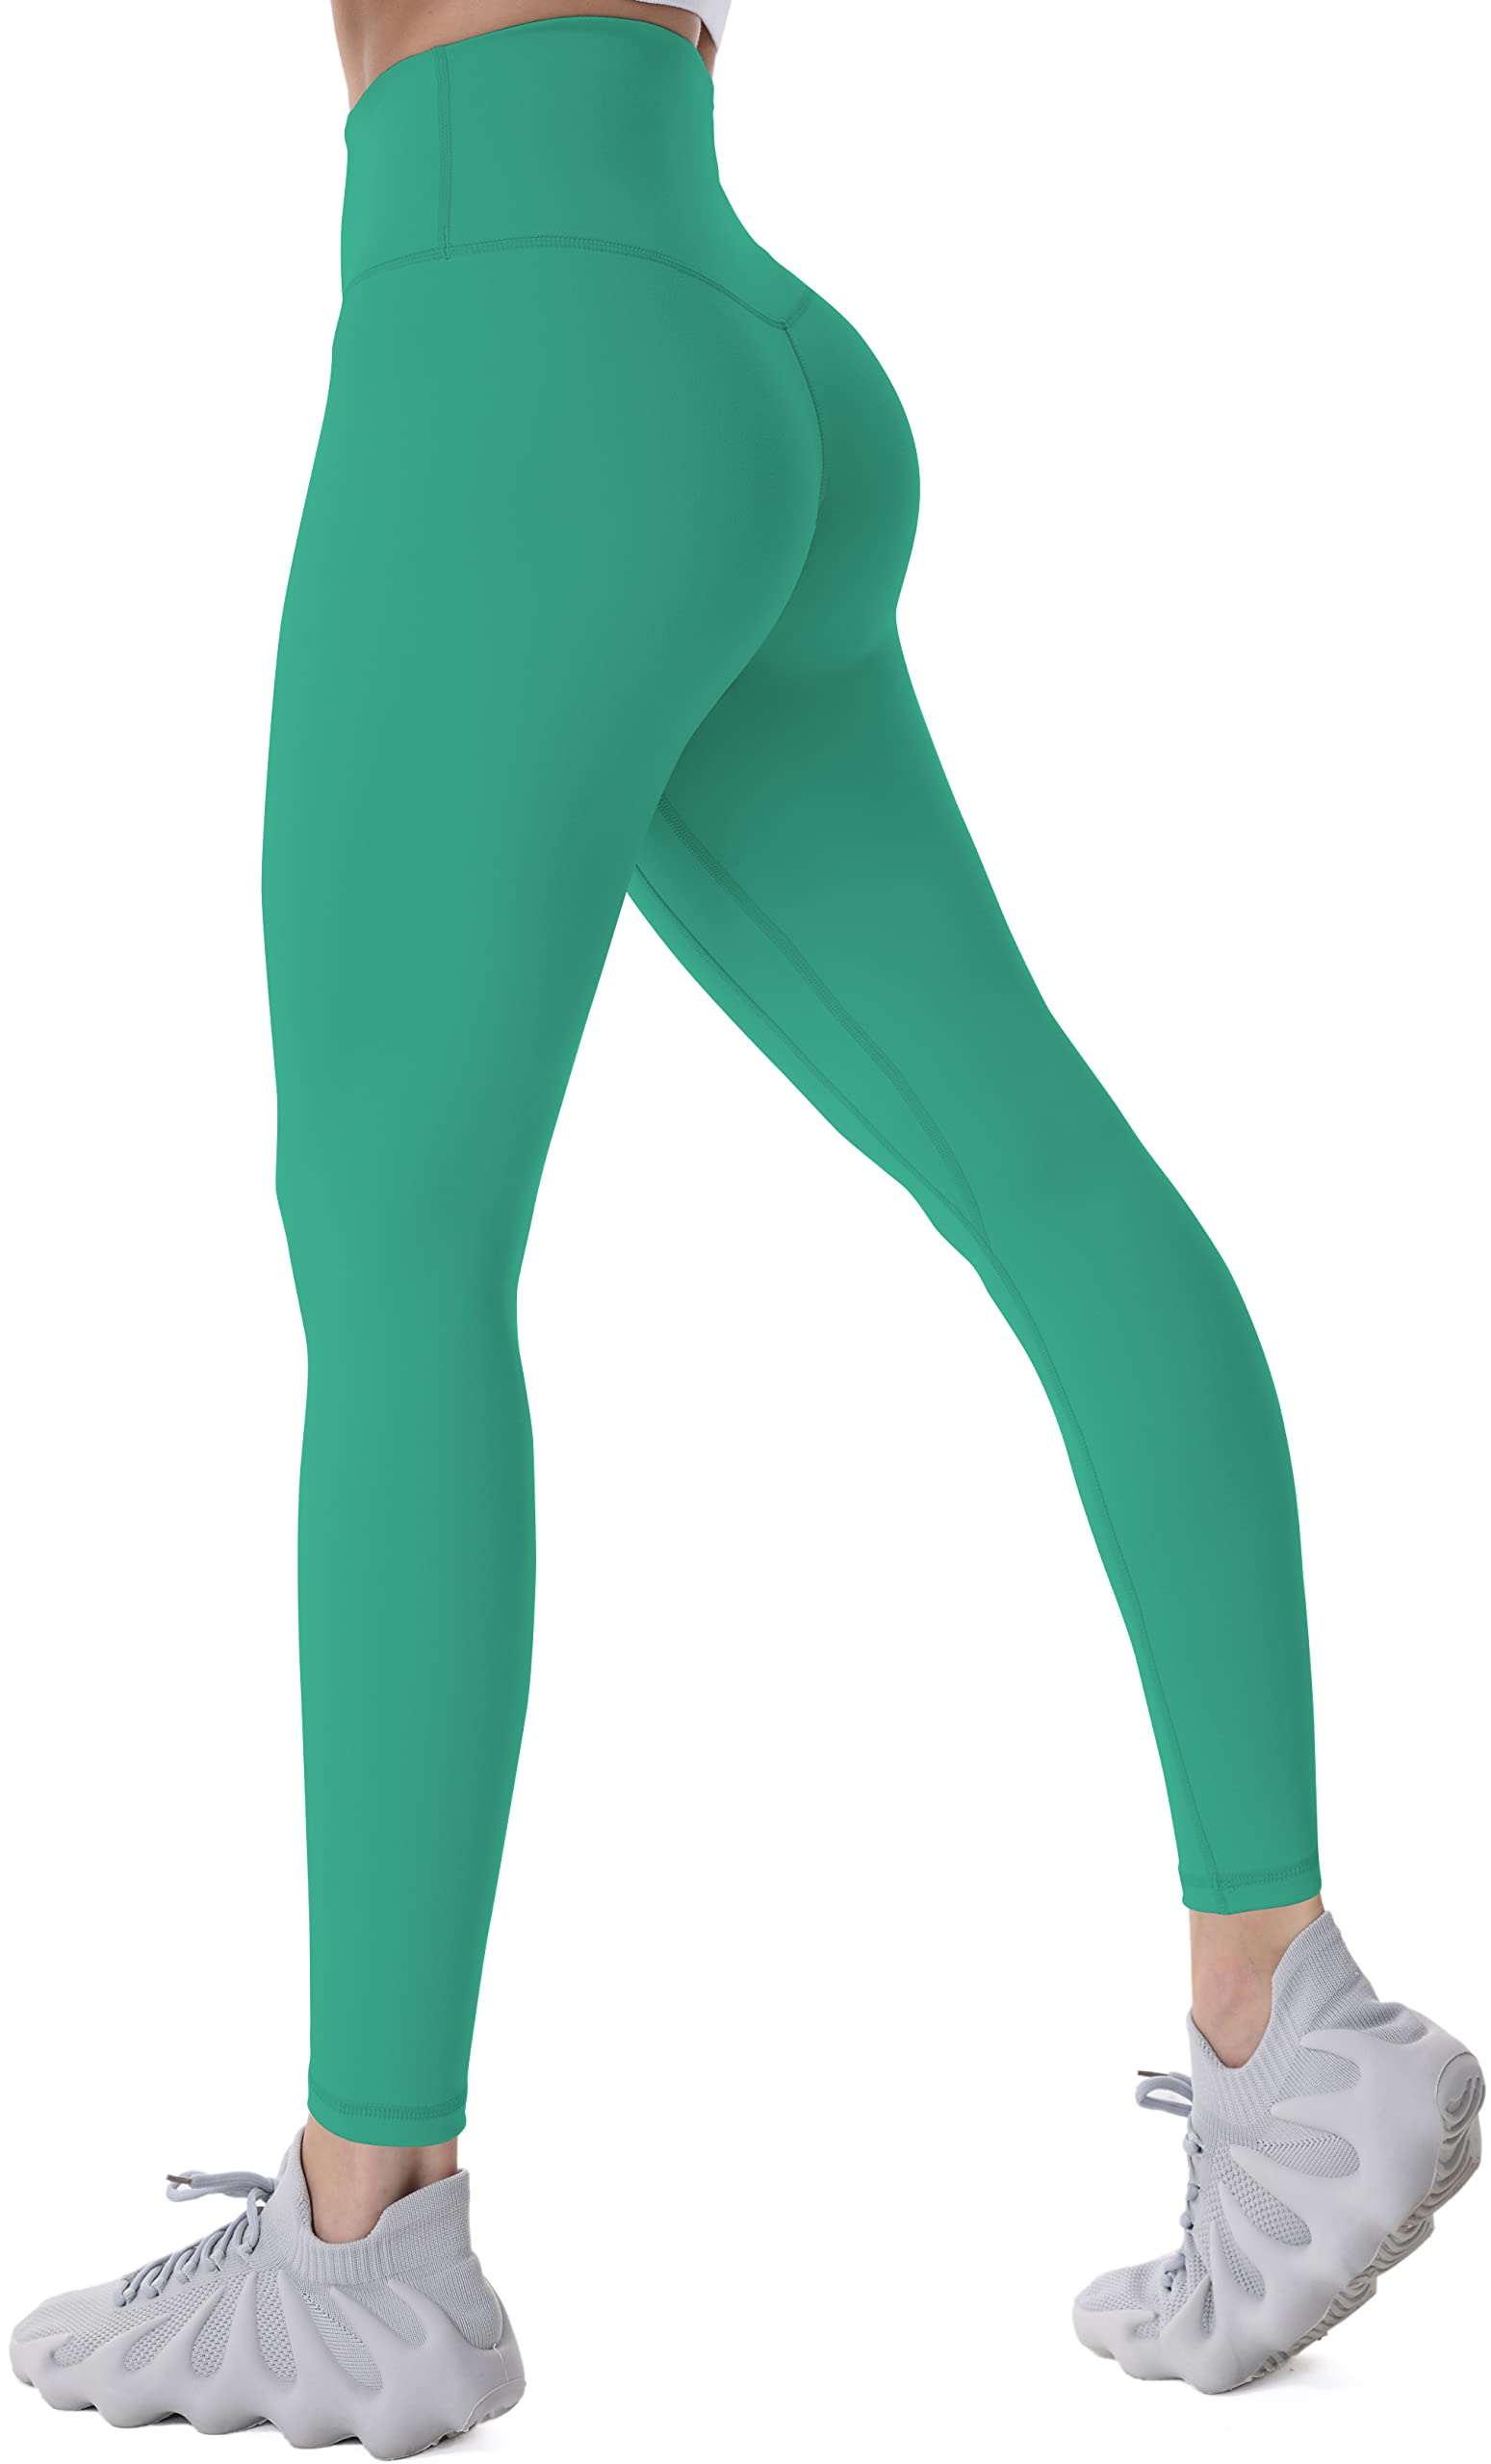  Workout Leggings For Women, Squat Proof High Waisted Yoga  Pants 4 Way Stretch, Buttery Soft 28 Inseam Golf Green Medium